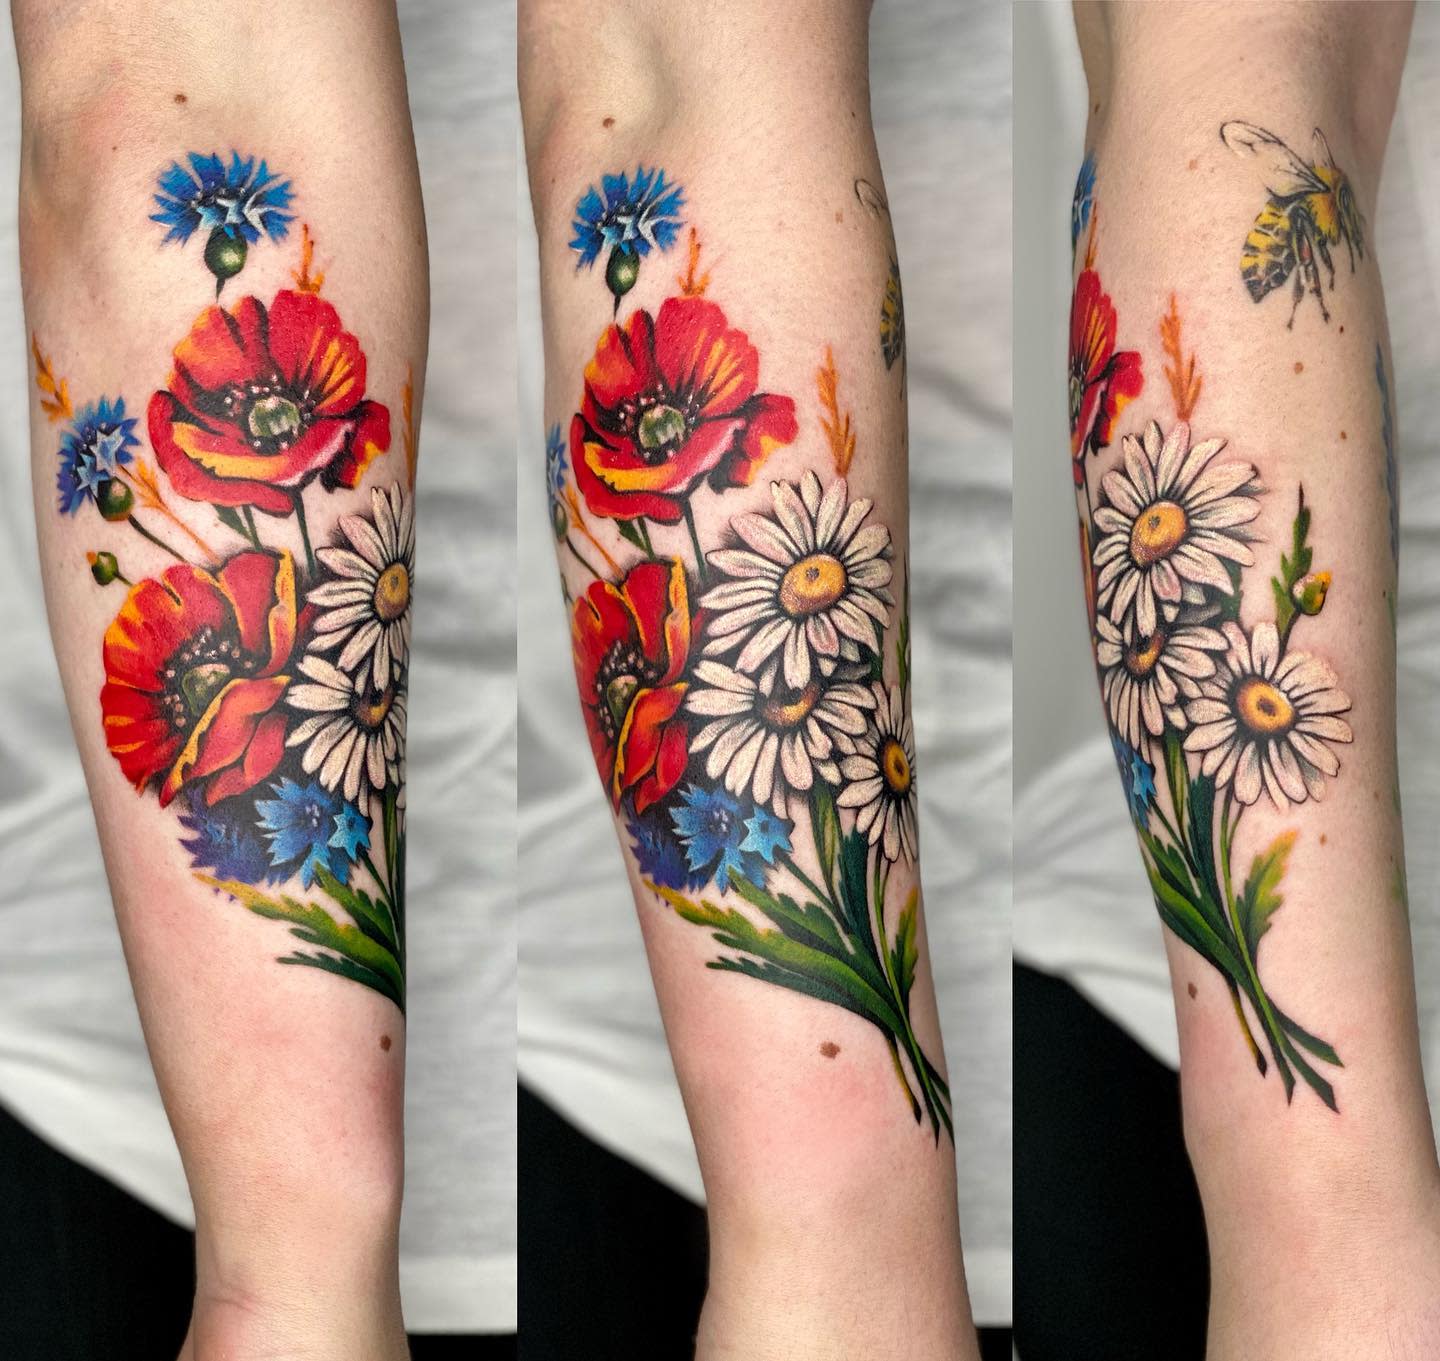 The Top 59 Botanical Tattoo Ideas - [2020 Inspiration Guide]